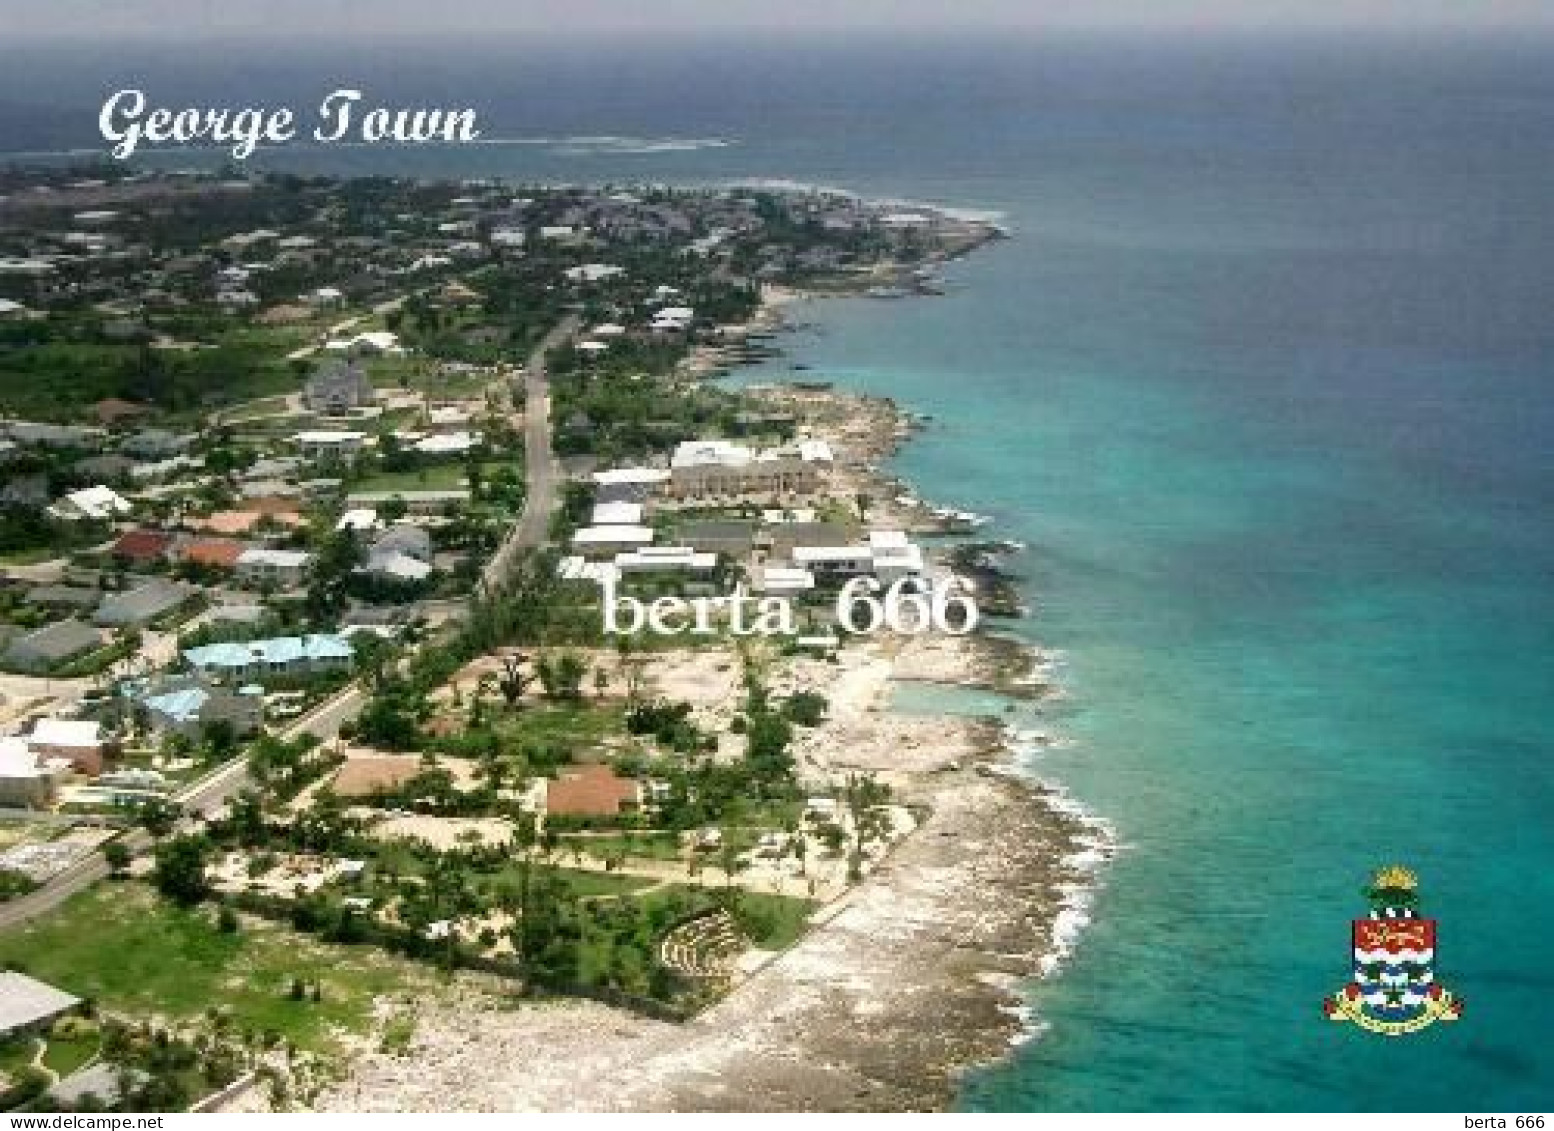 Cayman Islands George Town Overview New Postcard - Cayman Islands